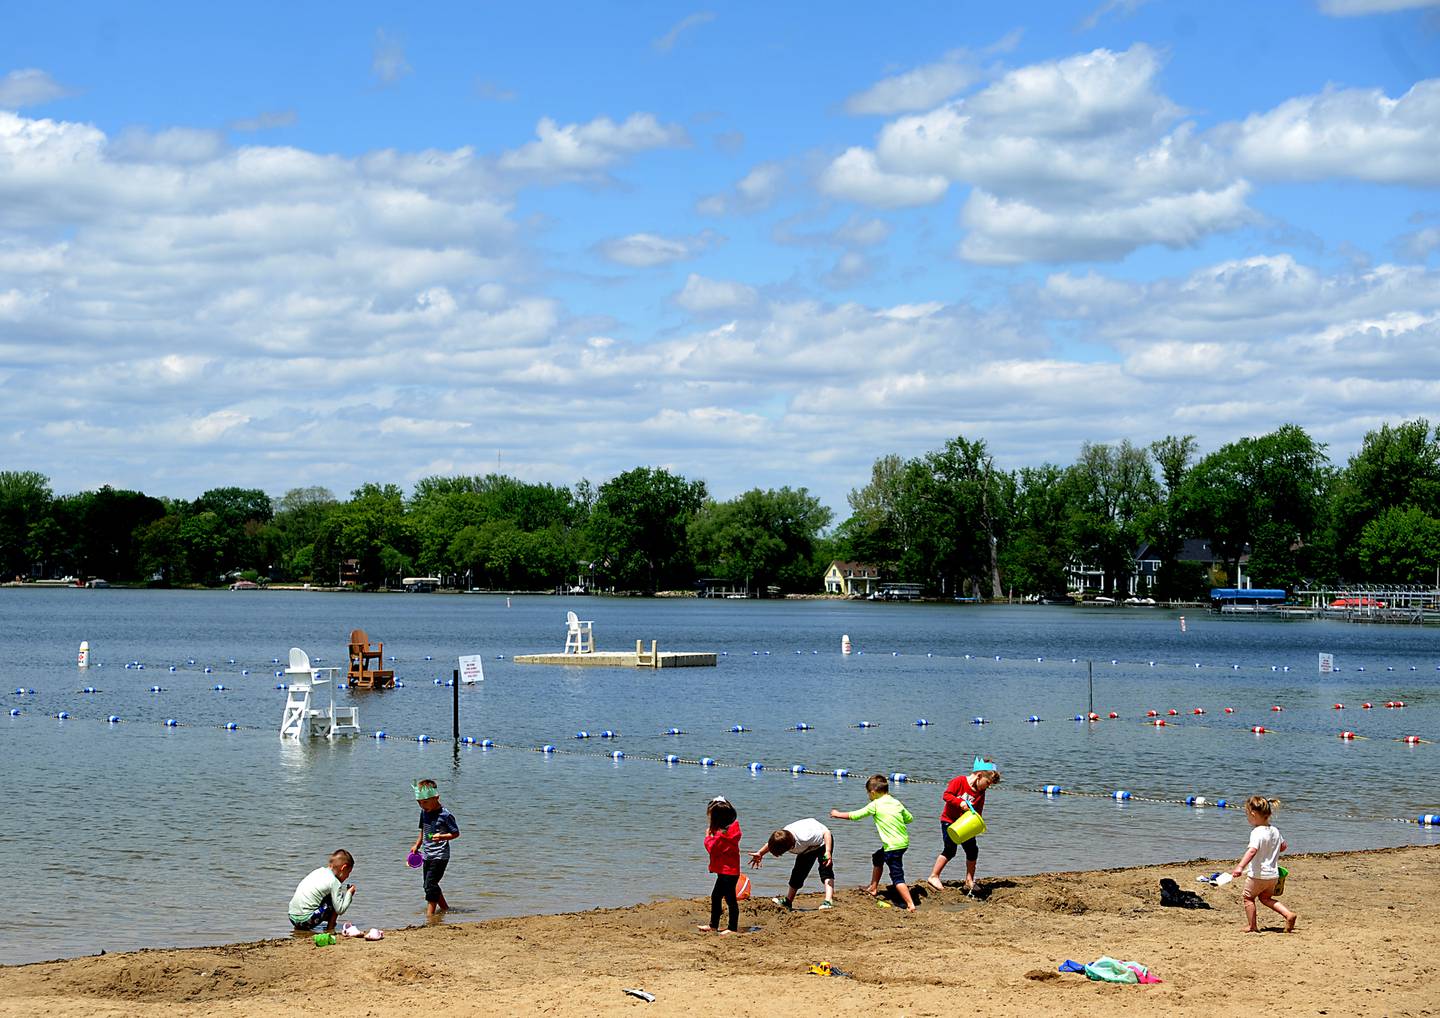 Children from a birthday party play on the beach Monday, May 23, 2022, at Crystal Lake's Main Beach, 300 Lakeshore Drive, in Crystal Lake.